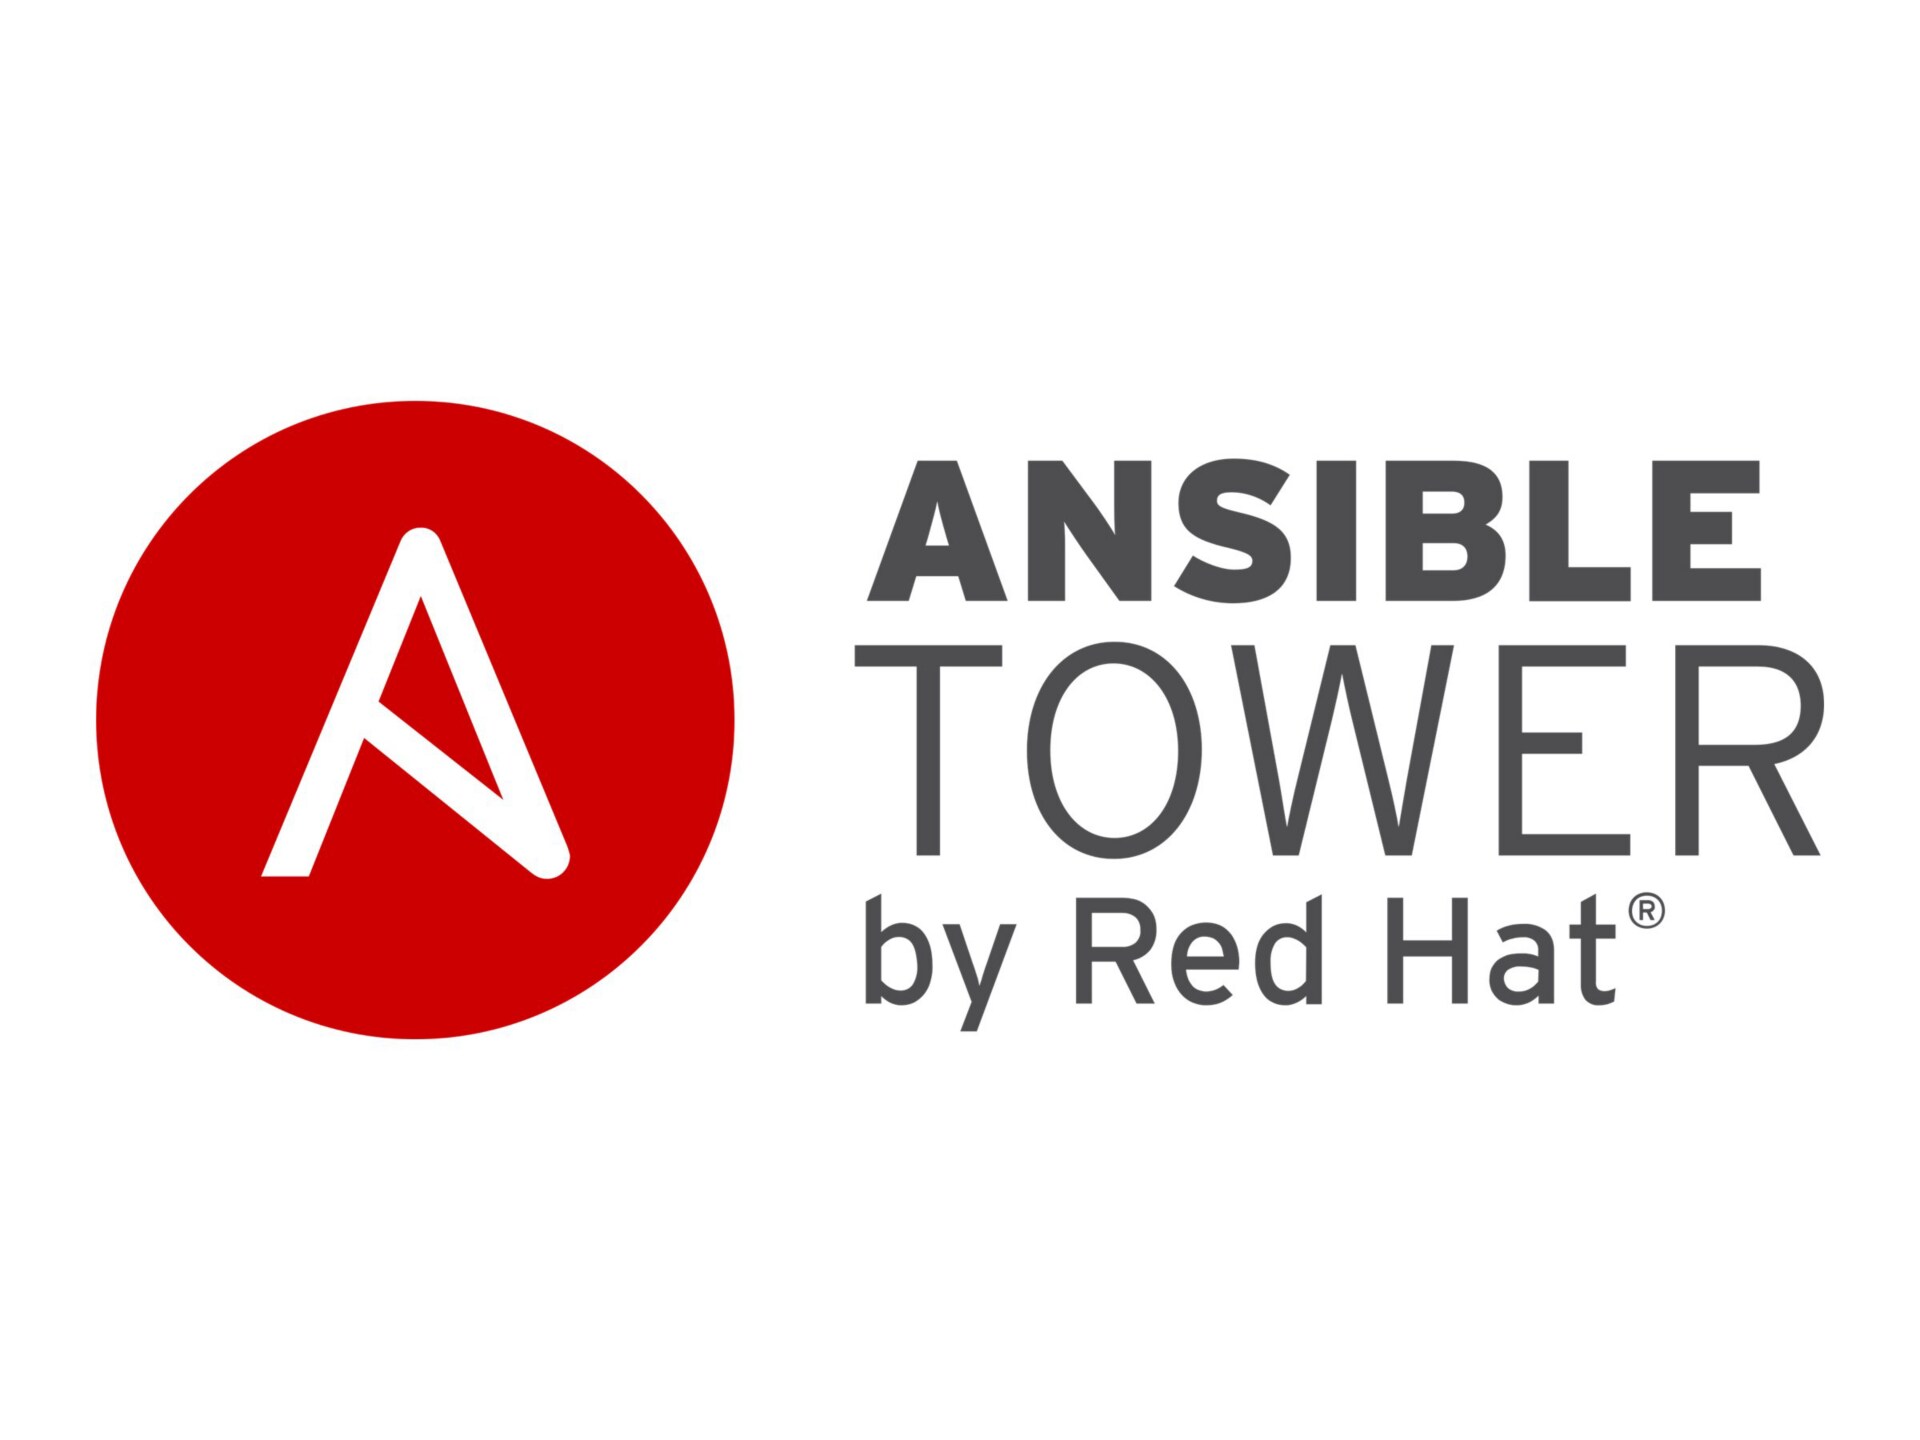 Red Hat Ansible Automation Platform - standard subscription (1 year) - 100 managed nodes